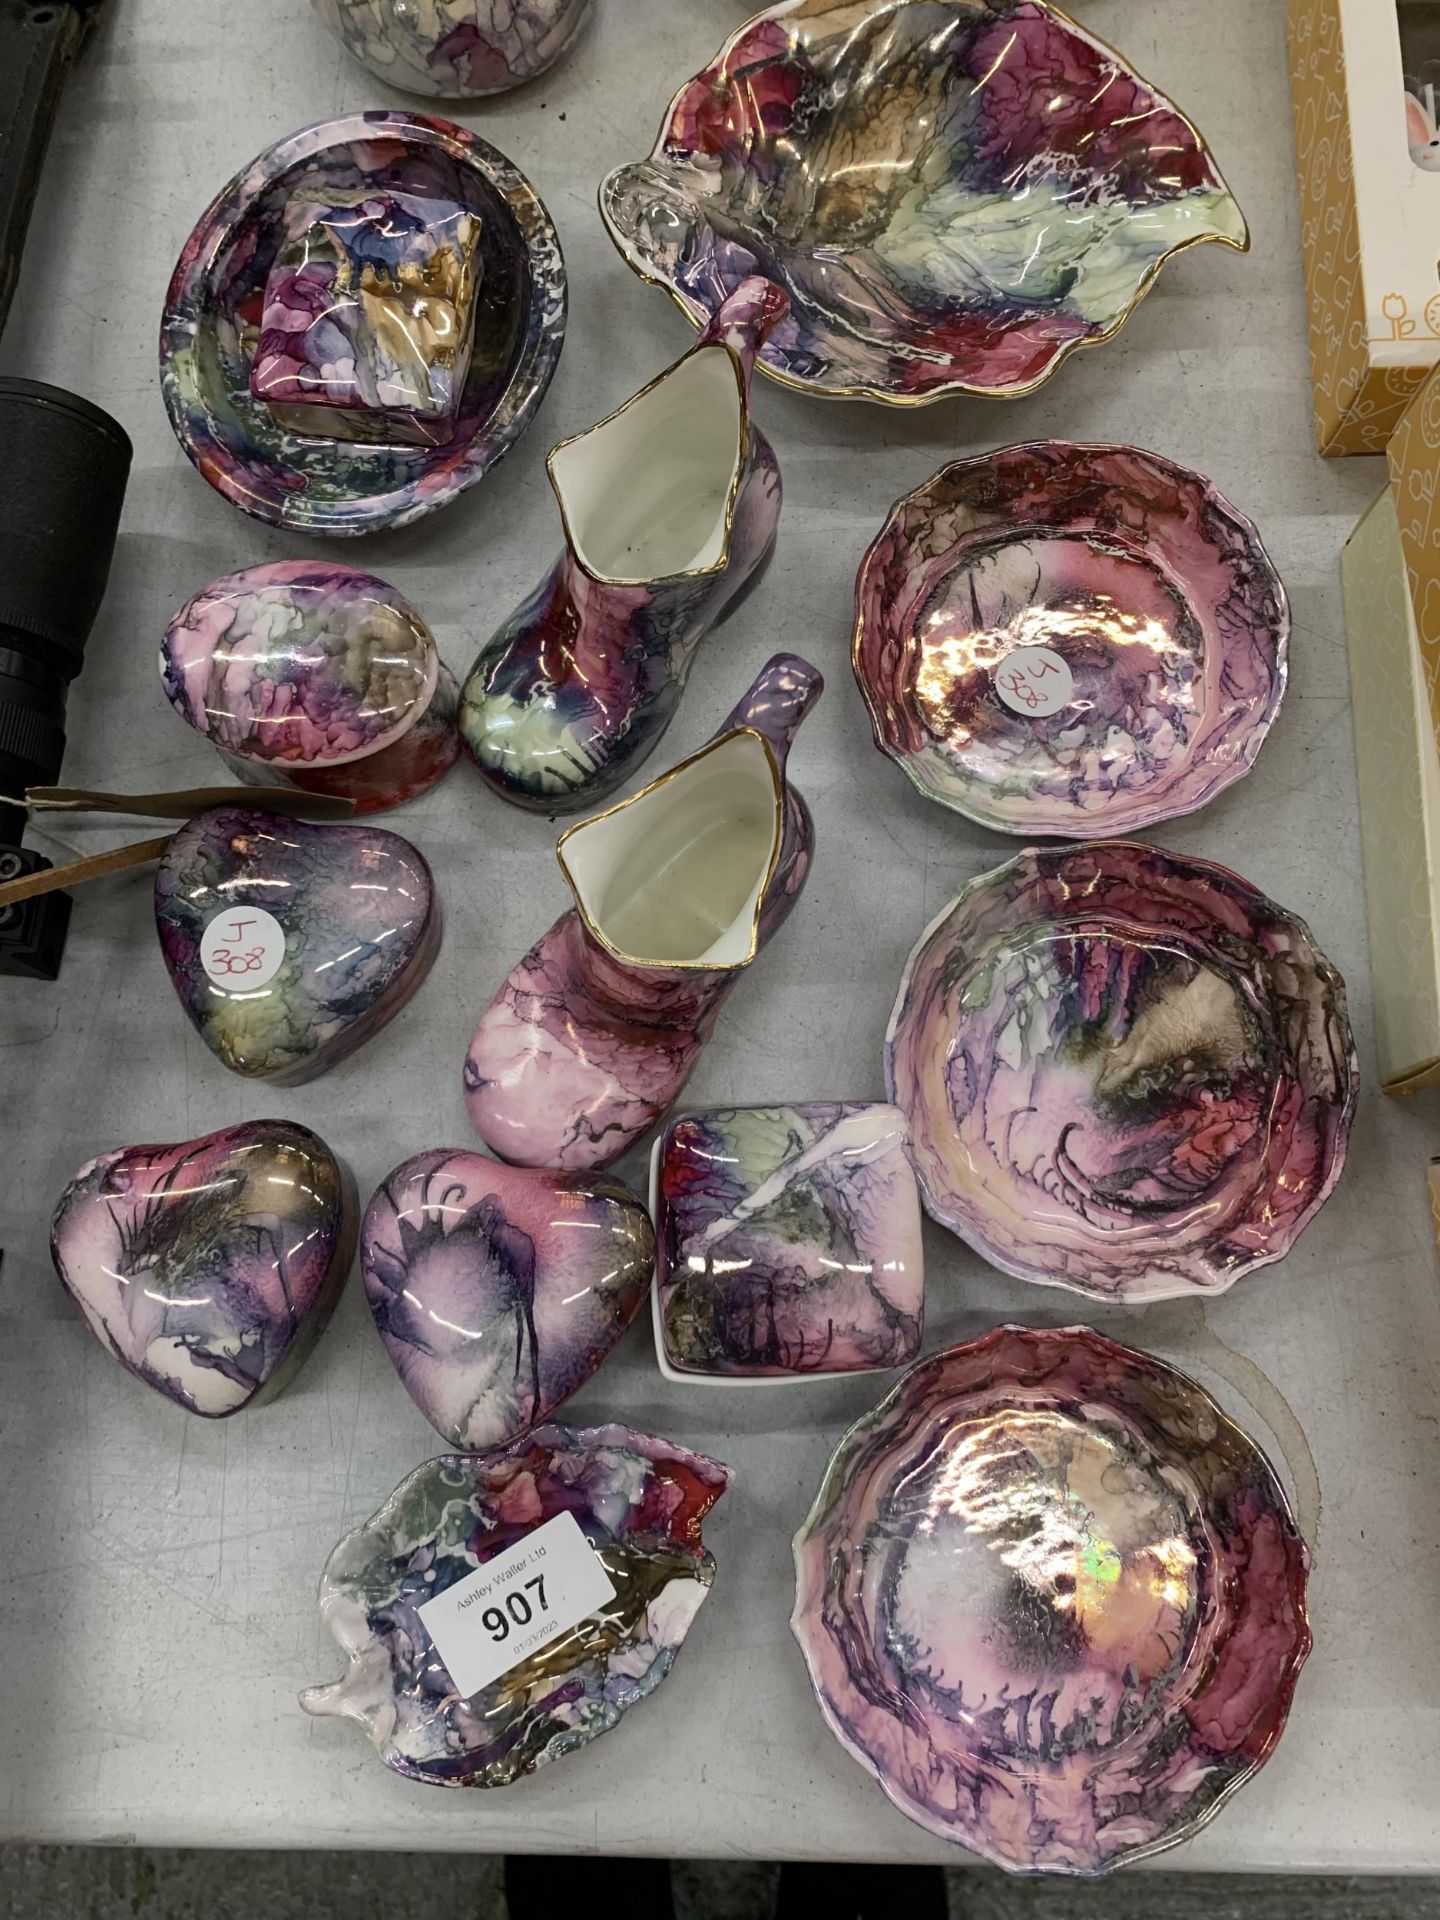 A LARGE QUANTITY OF HANDPAINTED CERAMIC ITEMS BY CELEBRATED CHESHIRE ARTIST HELEN BULL - Image 3 of 8